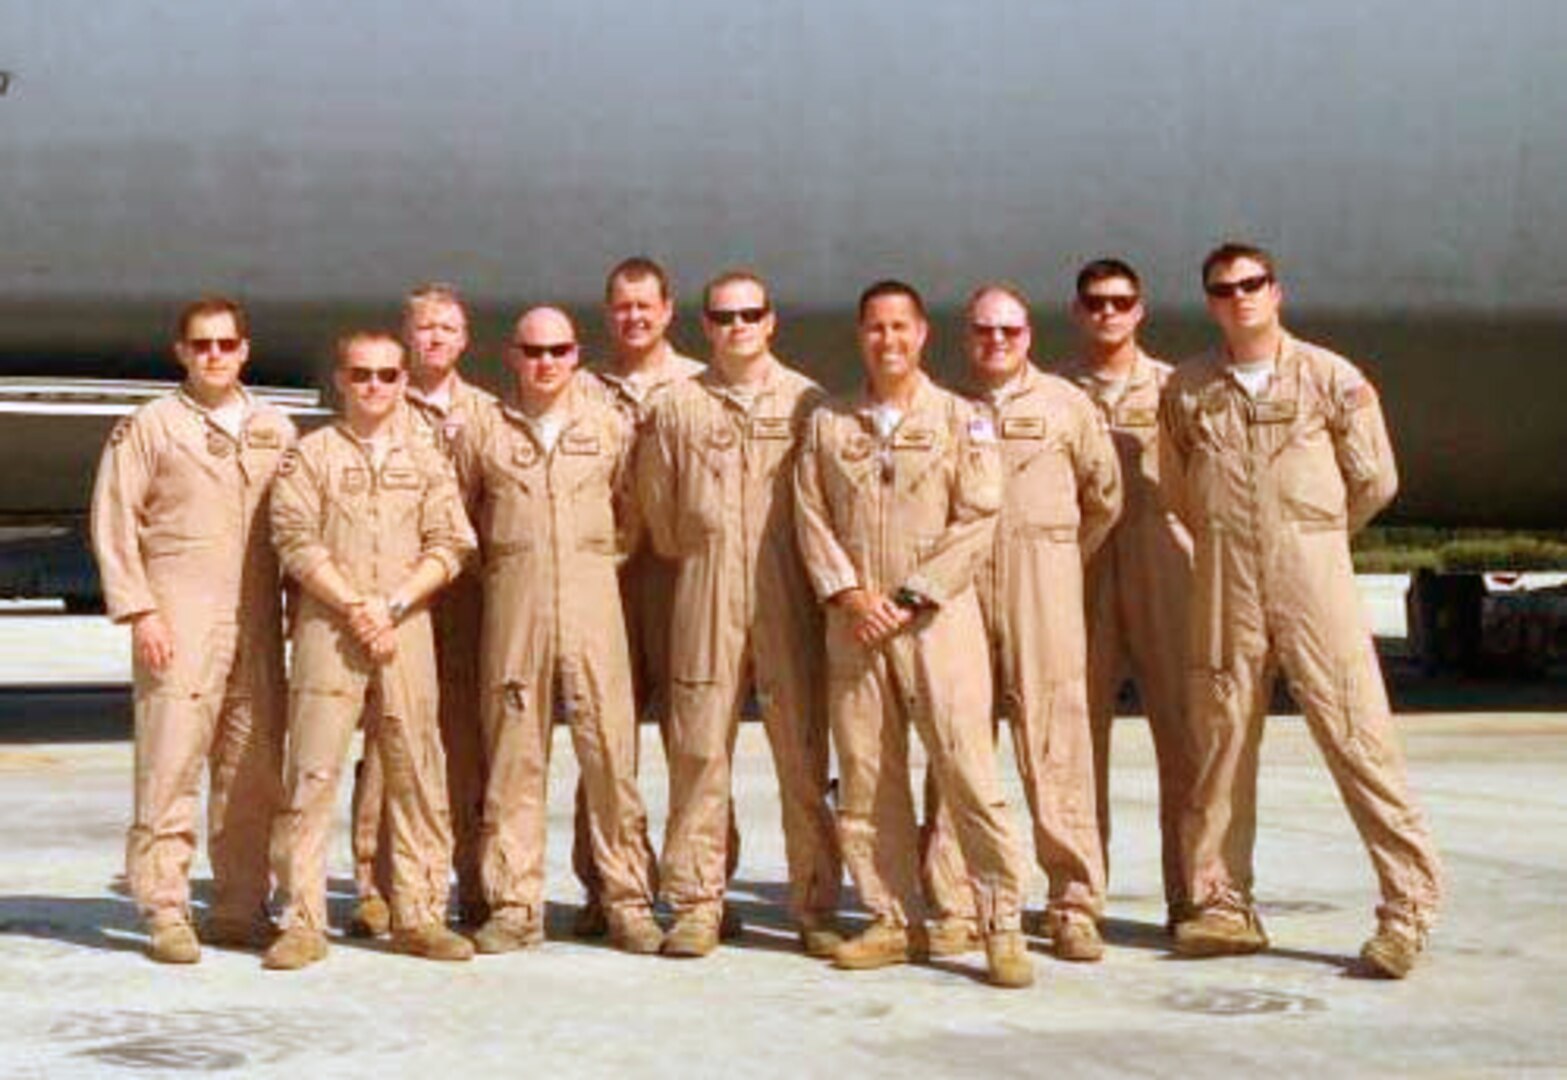 Crew members who received the 2013 Earl T. Ricks award pose in front of a C-5 Galaxy April 19, 2013. During an overseas mission the aircraft struck multiple birds during takeoff. Two engines were damaged but the crew managed to return the aircraft safely to the airfield.